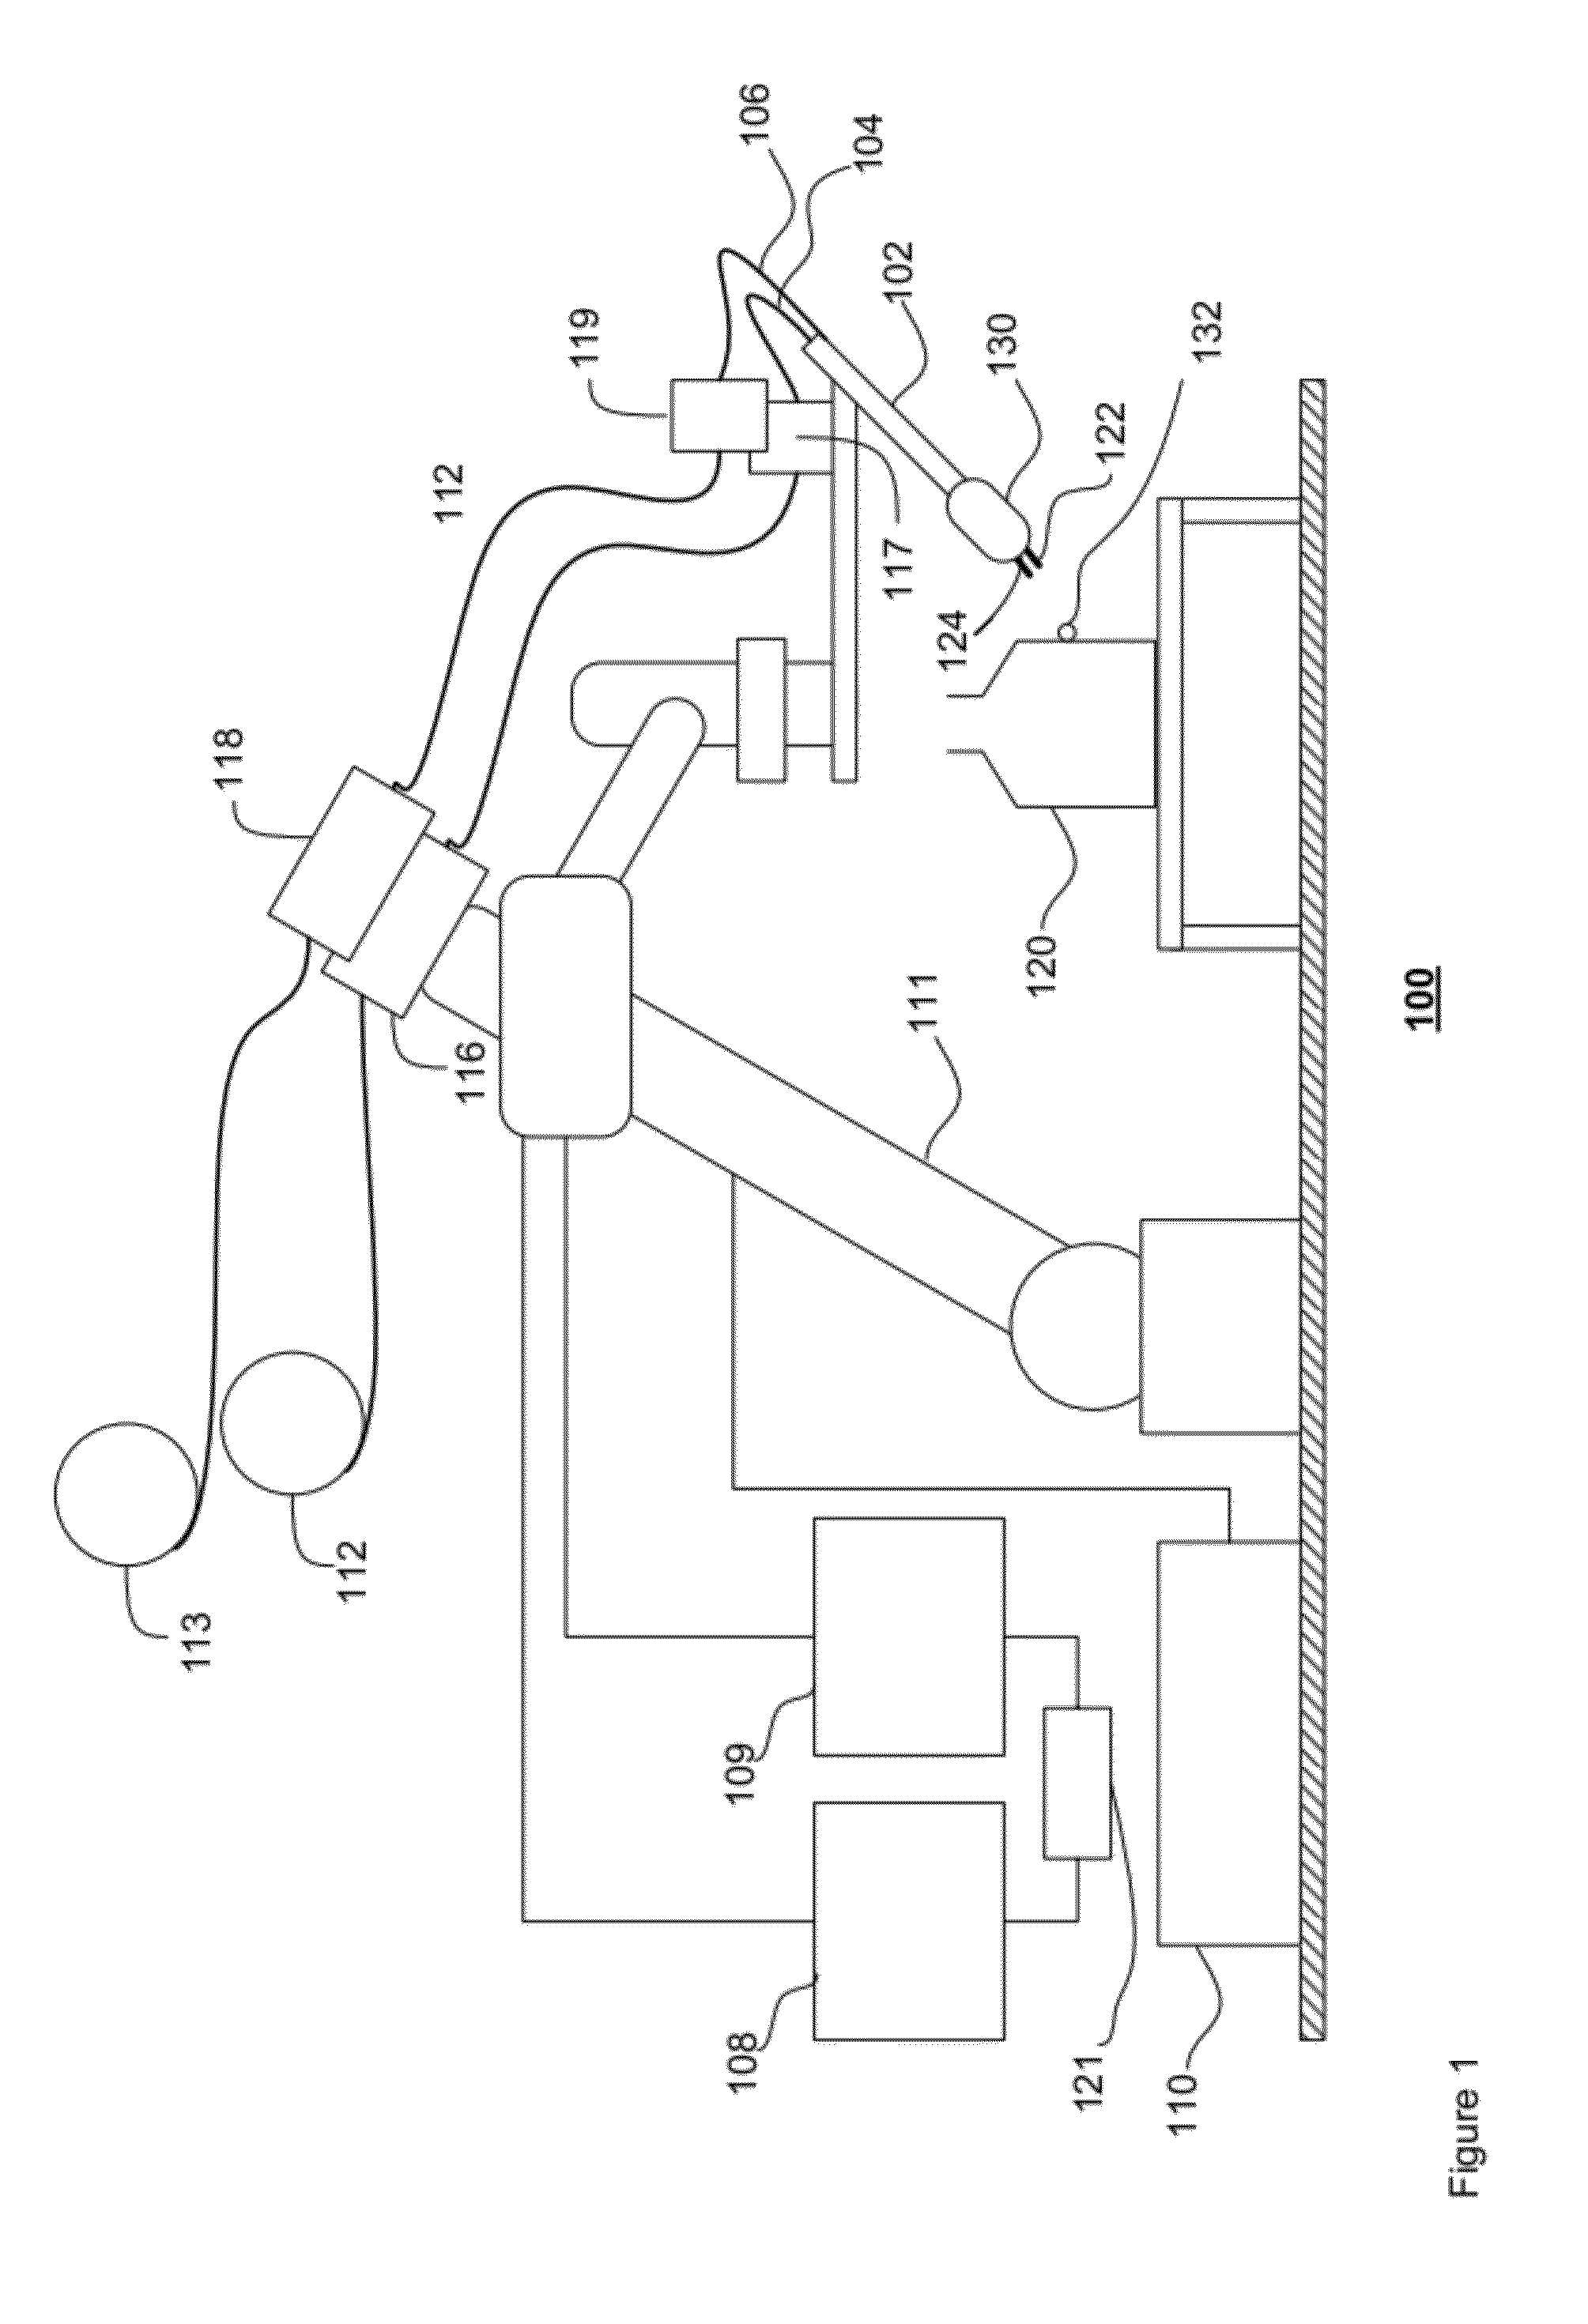 System and Method for High-Speed Robotic Cladding of Metals